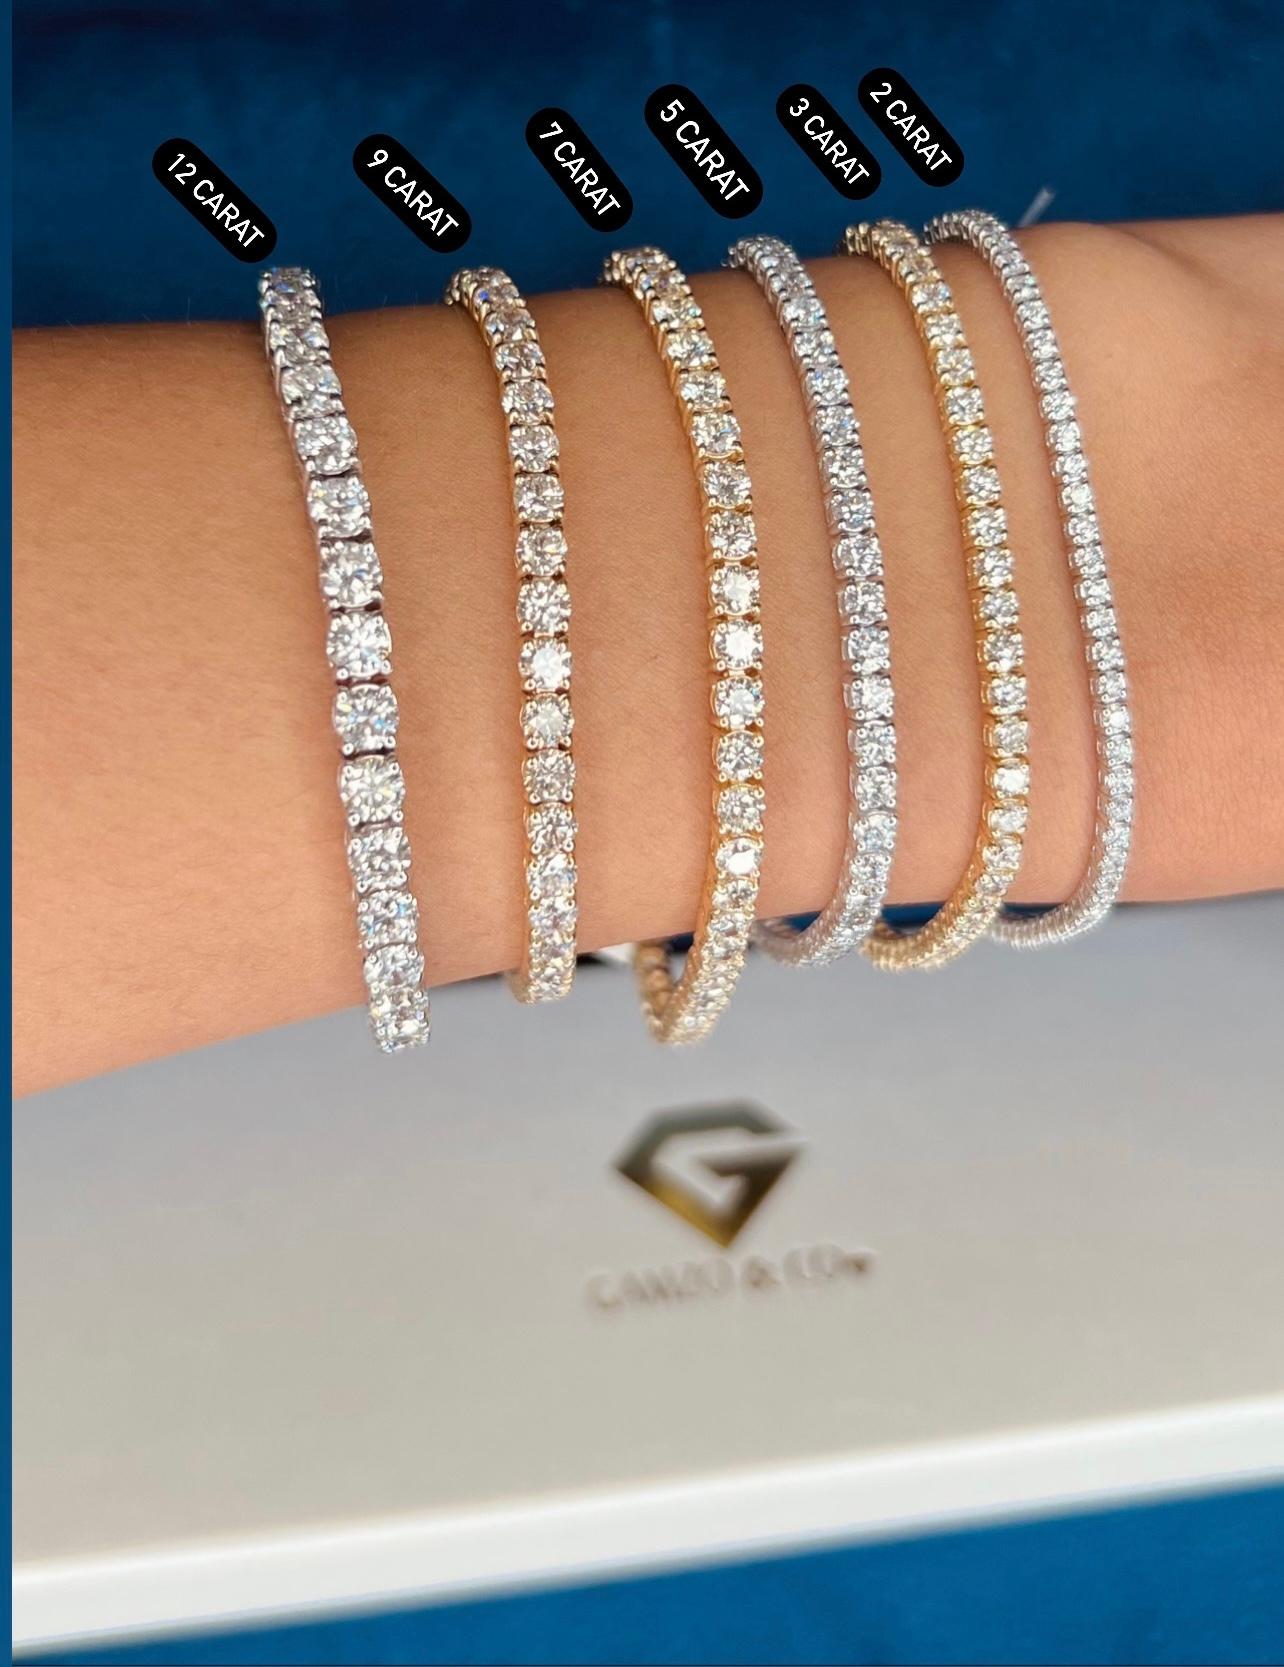 This diamond tennis bracelet features beautifully cut round diamonds set gorgeously in 14k gold.

Metal: 14k Gold
Diamond Cut: Round Natural Diamond 
Total Diamond Carats: 9ct
Diamond Clarity: VS
Diamond Color: F-G
Color: Yellow Gold
Bracelet